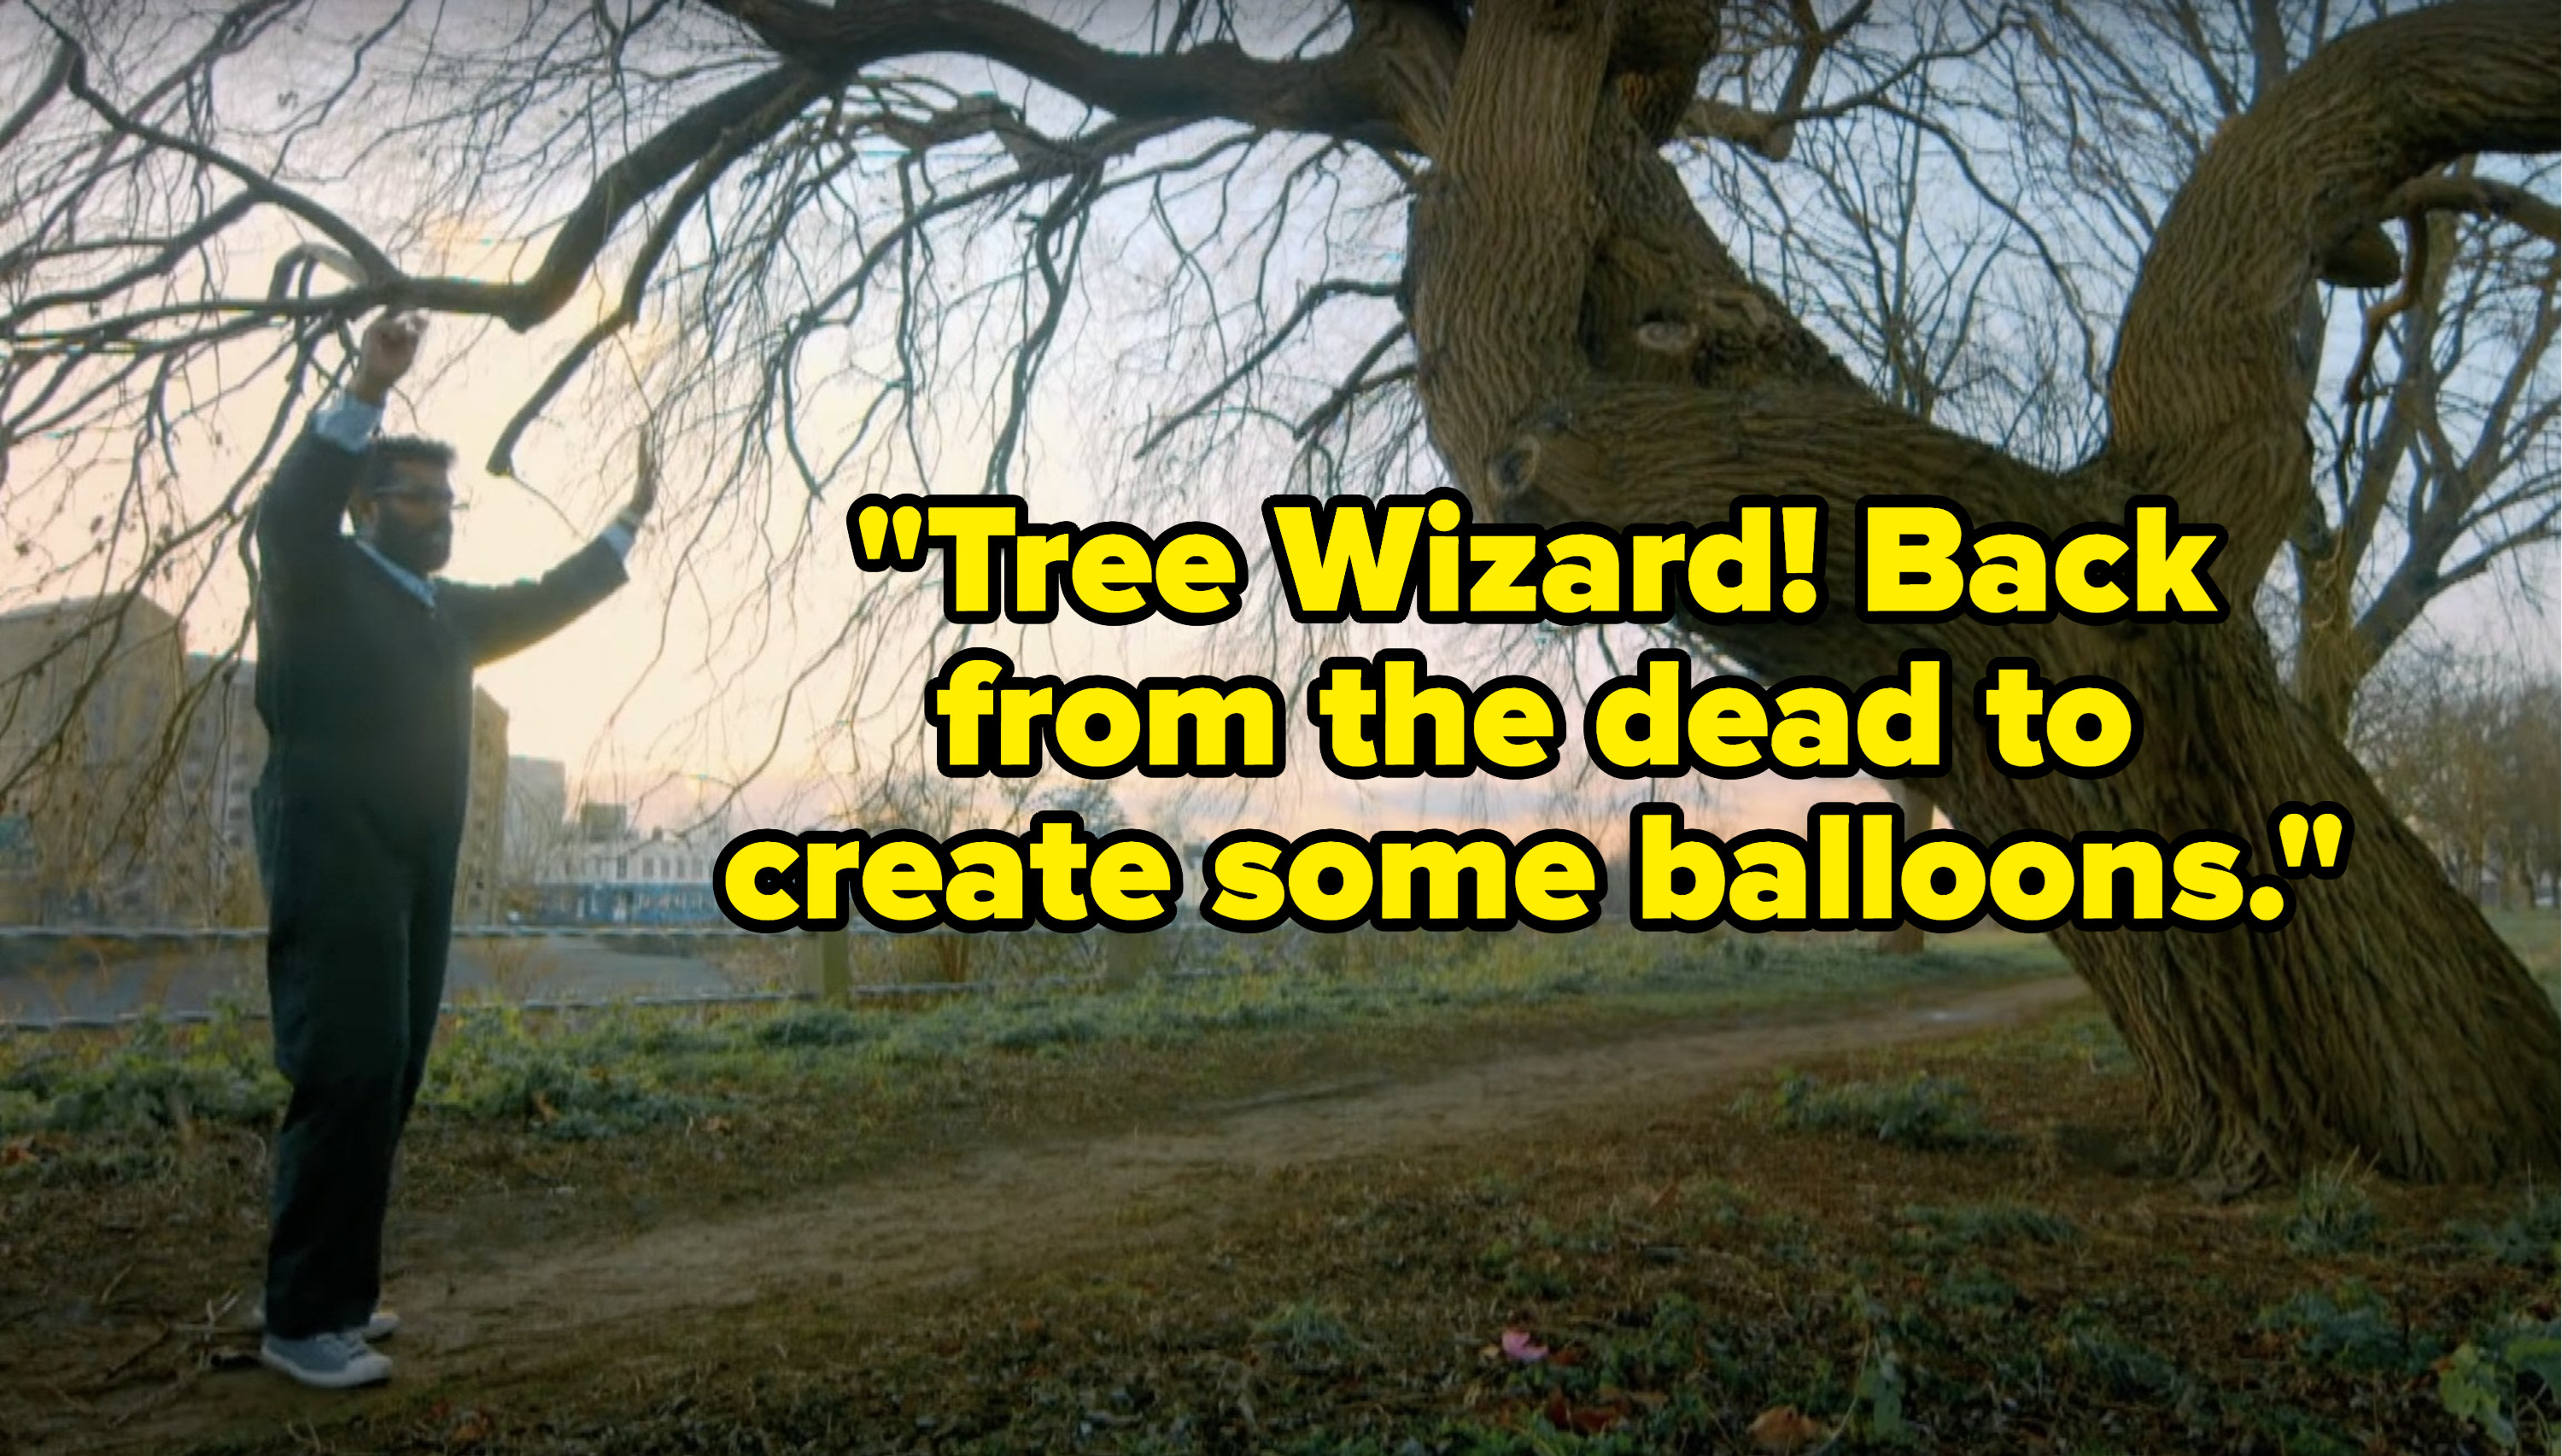 Romesh Ranganathan says, Tree Wizard, Back from the dead to create some balloons